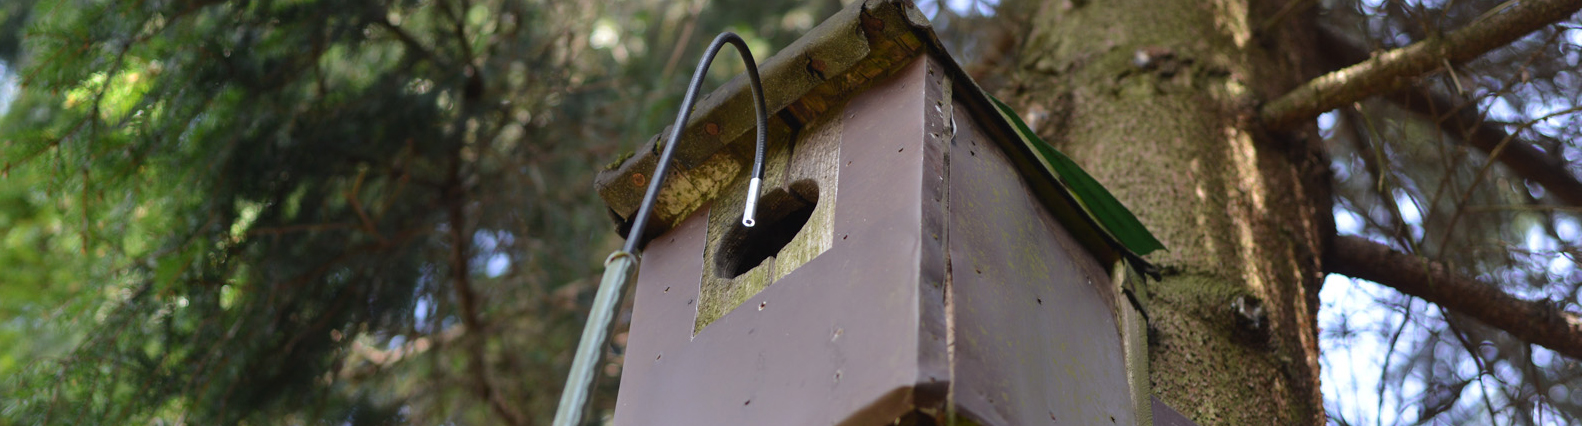 a nest box mounted on a tree with a boroscope held up near the entrance hole